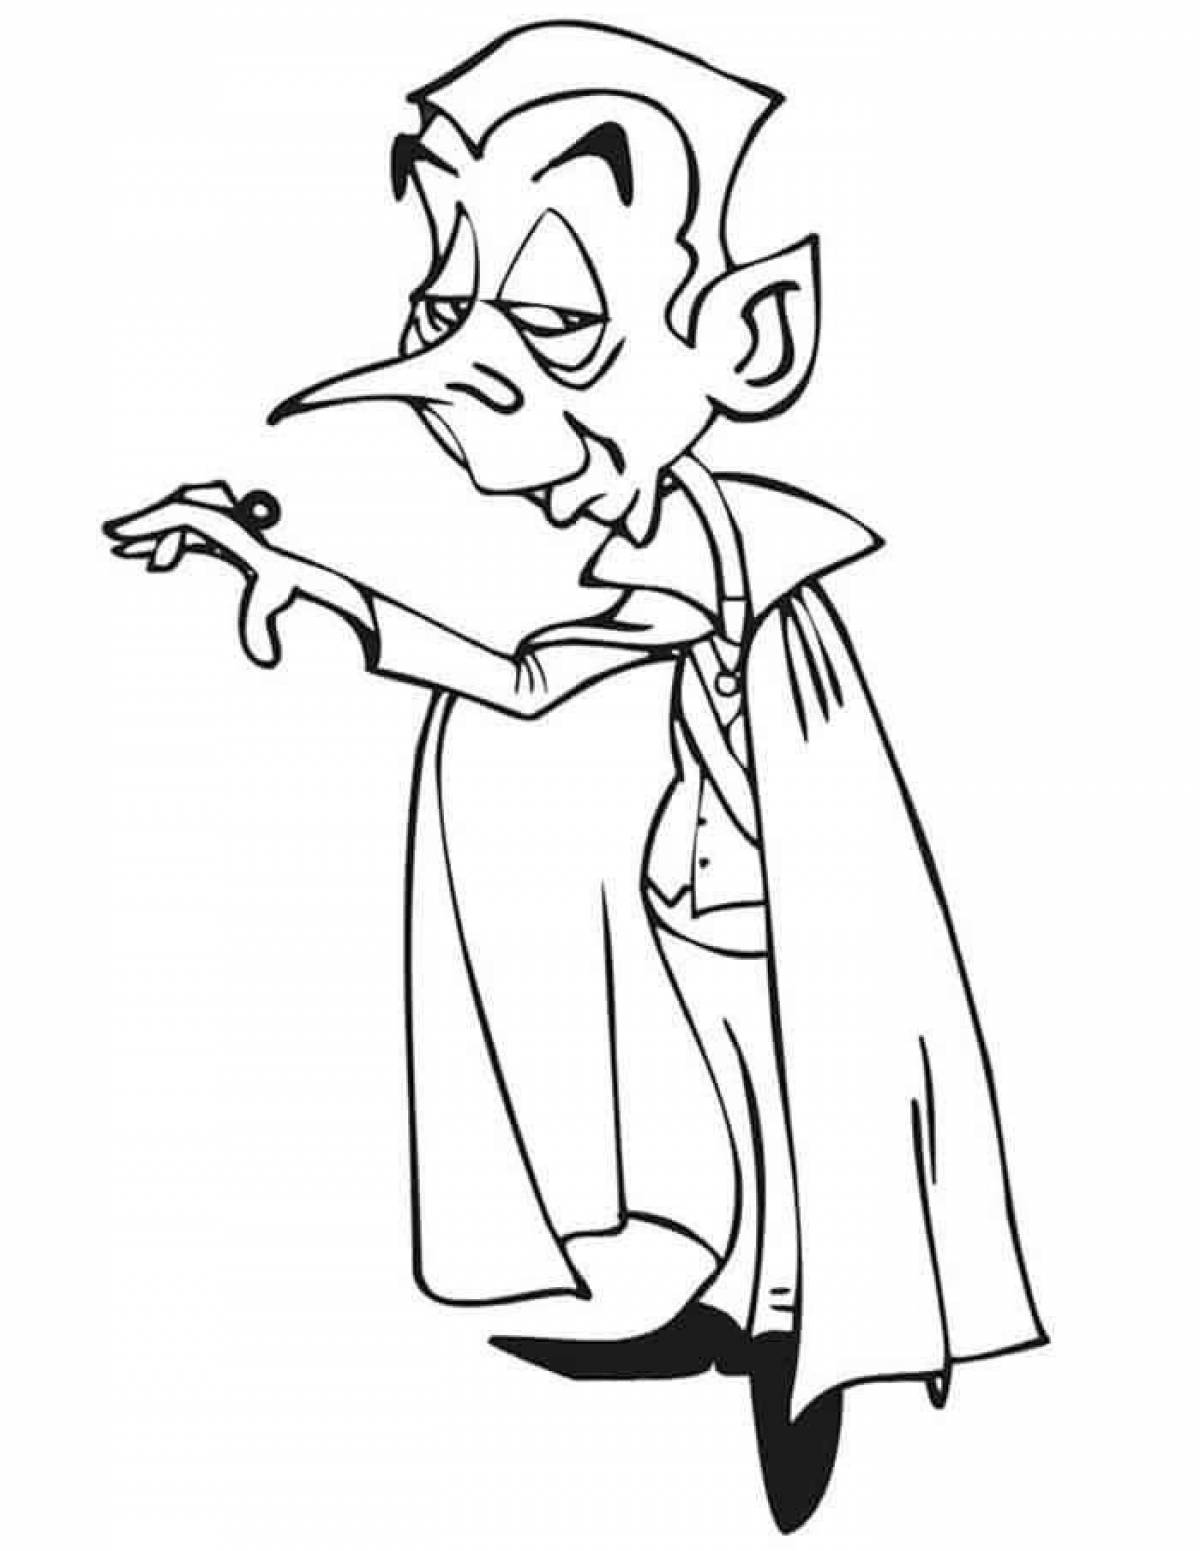 Sinister vampire coloring page